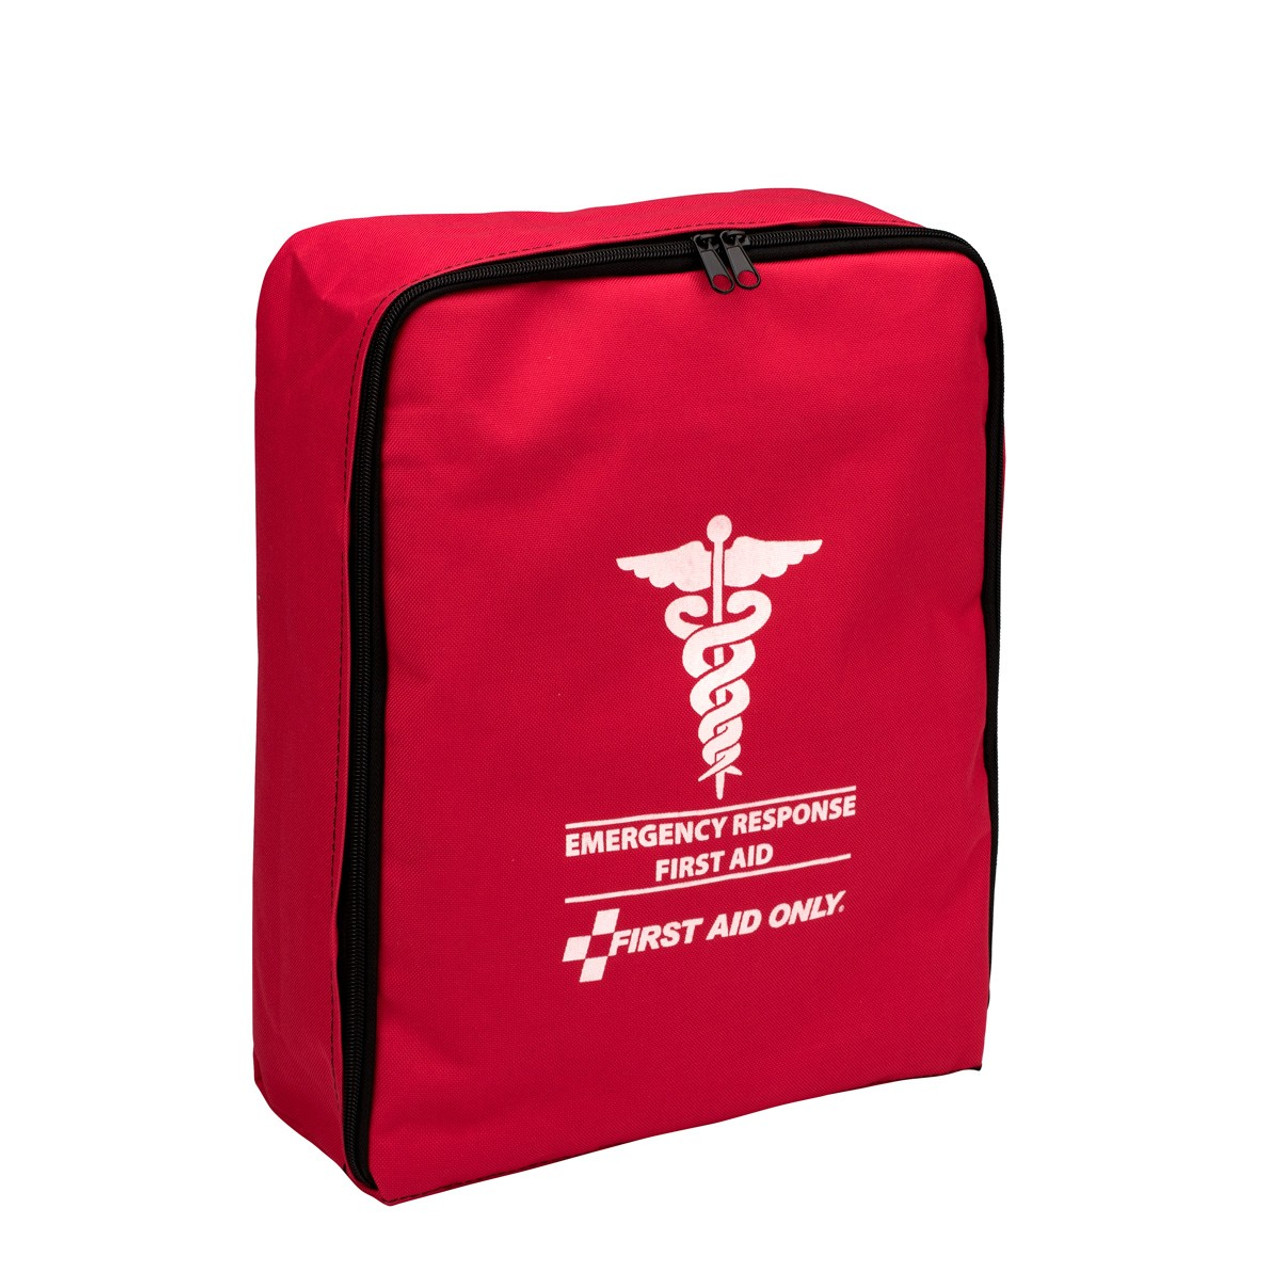 First Aid Kits - Small, Emergency Response